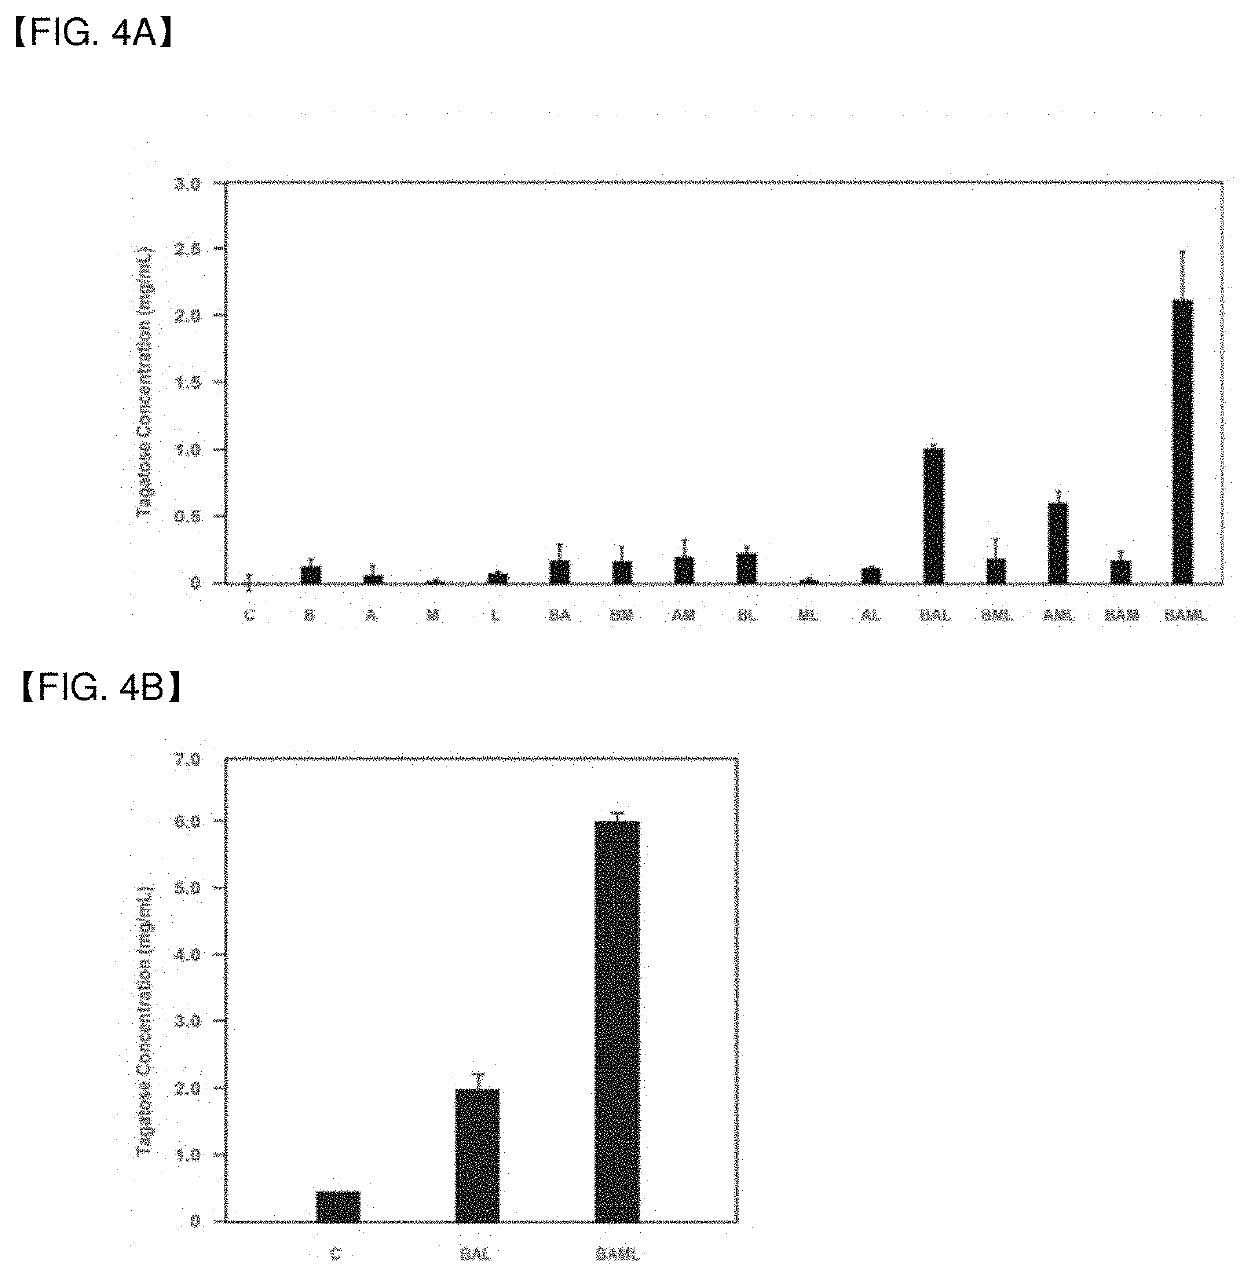 Agarase-3,6-anhydro-l-galactosidase-arabinose isomerase enzyme complex and method for production of tagatose from agar using the same